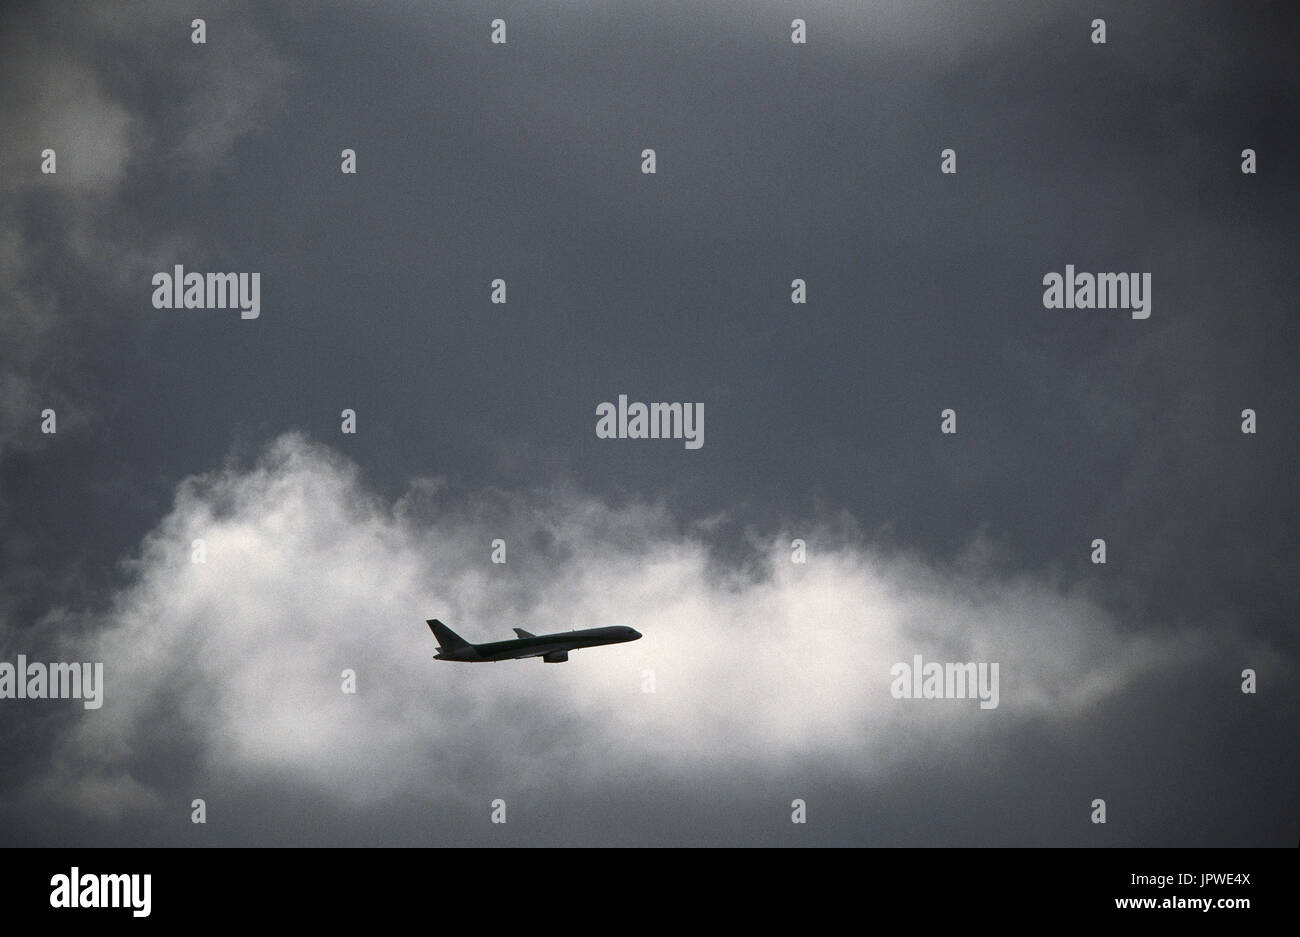 Boeing 757-200 climbing enroute amongst dark clouds Stock Photo